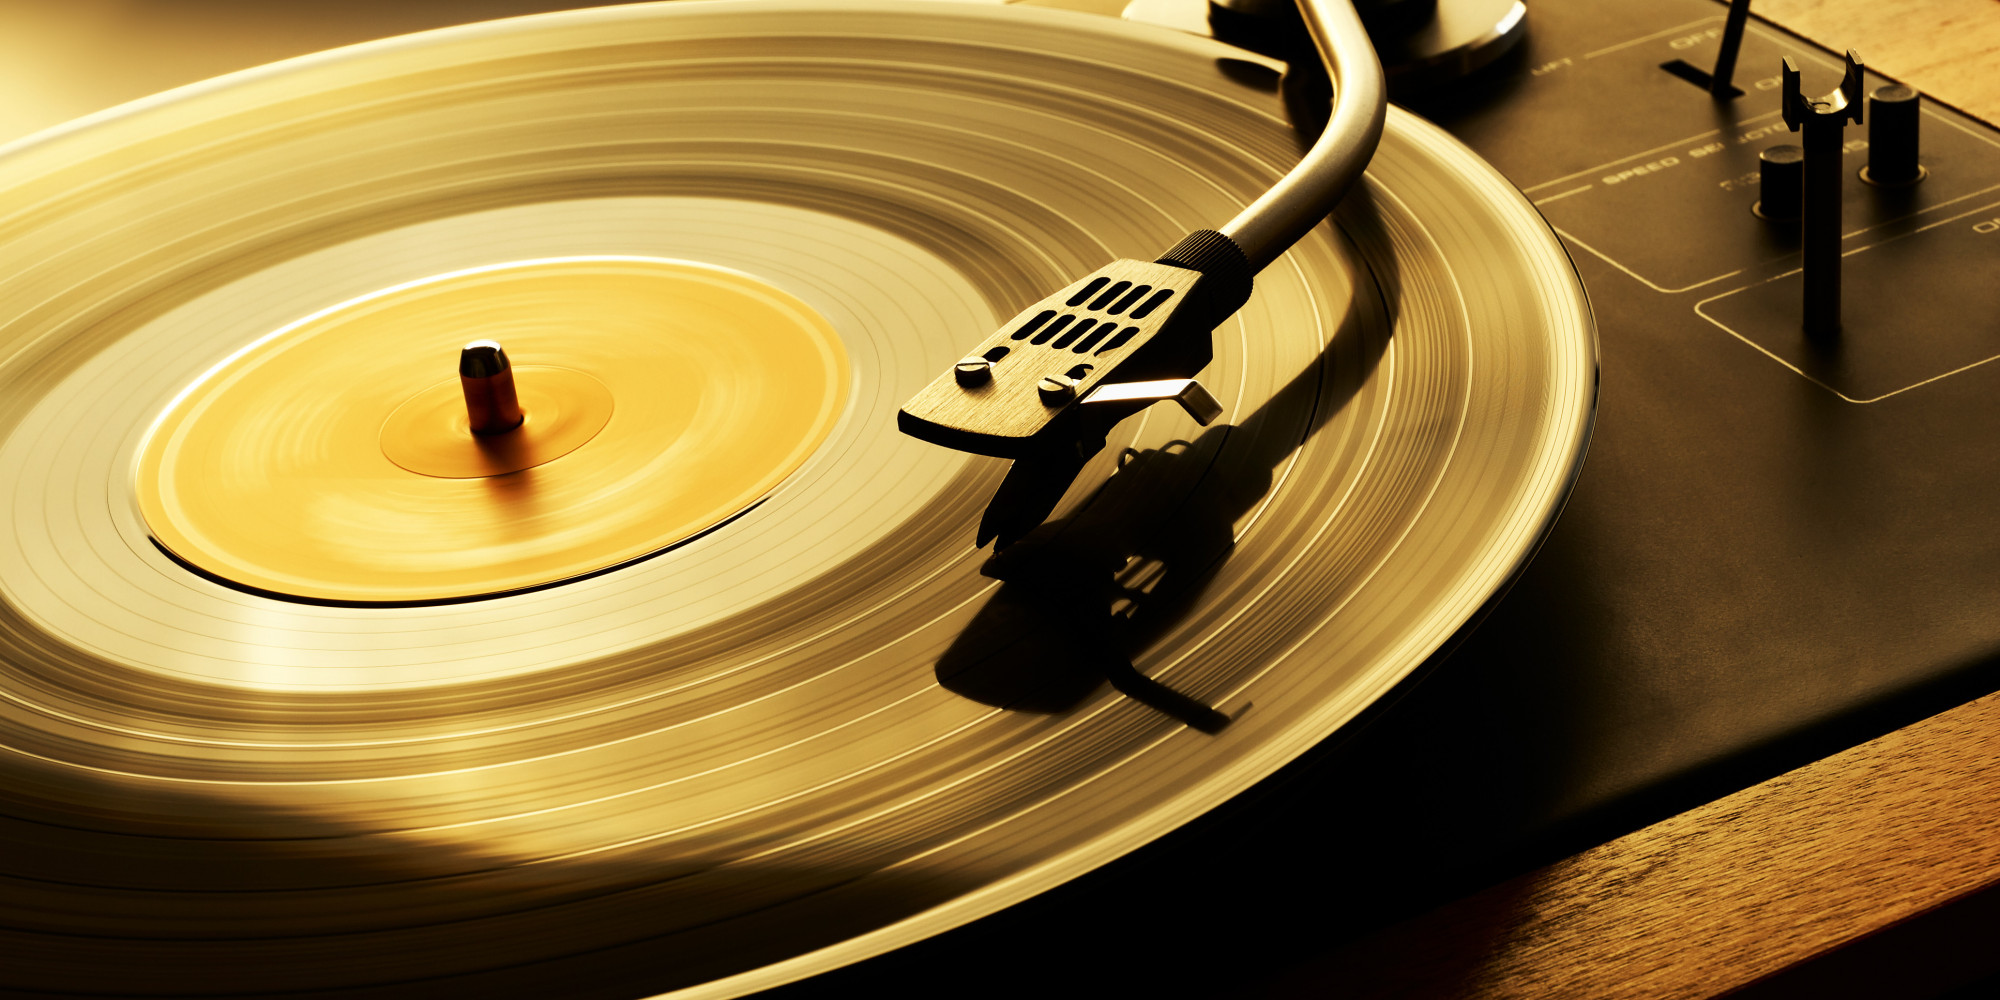 Playing vinyl records: the sweetness of doing nothing » Mike Frost